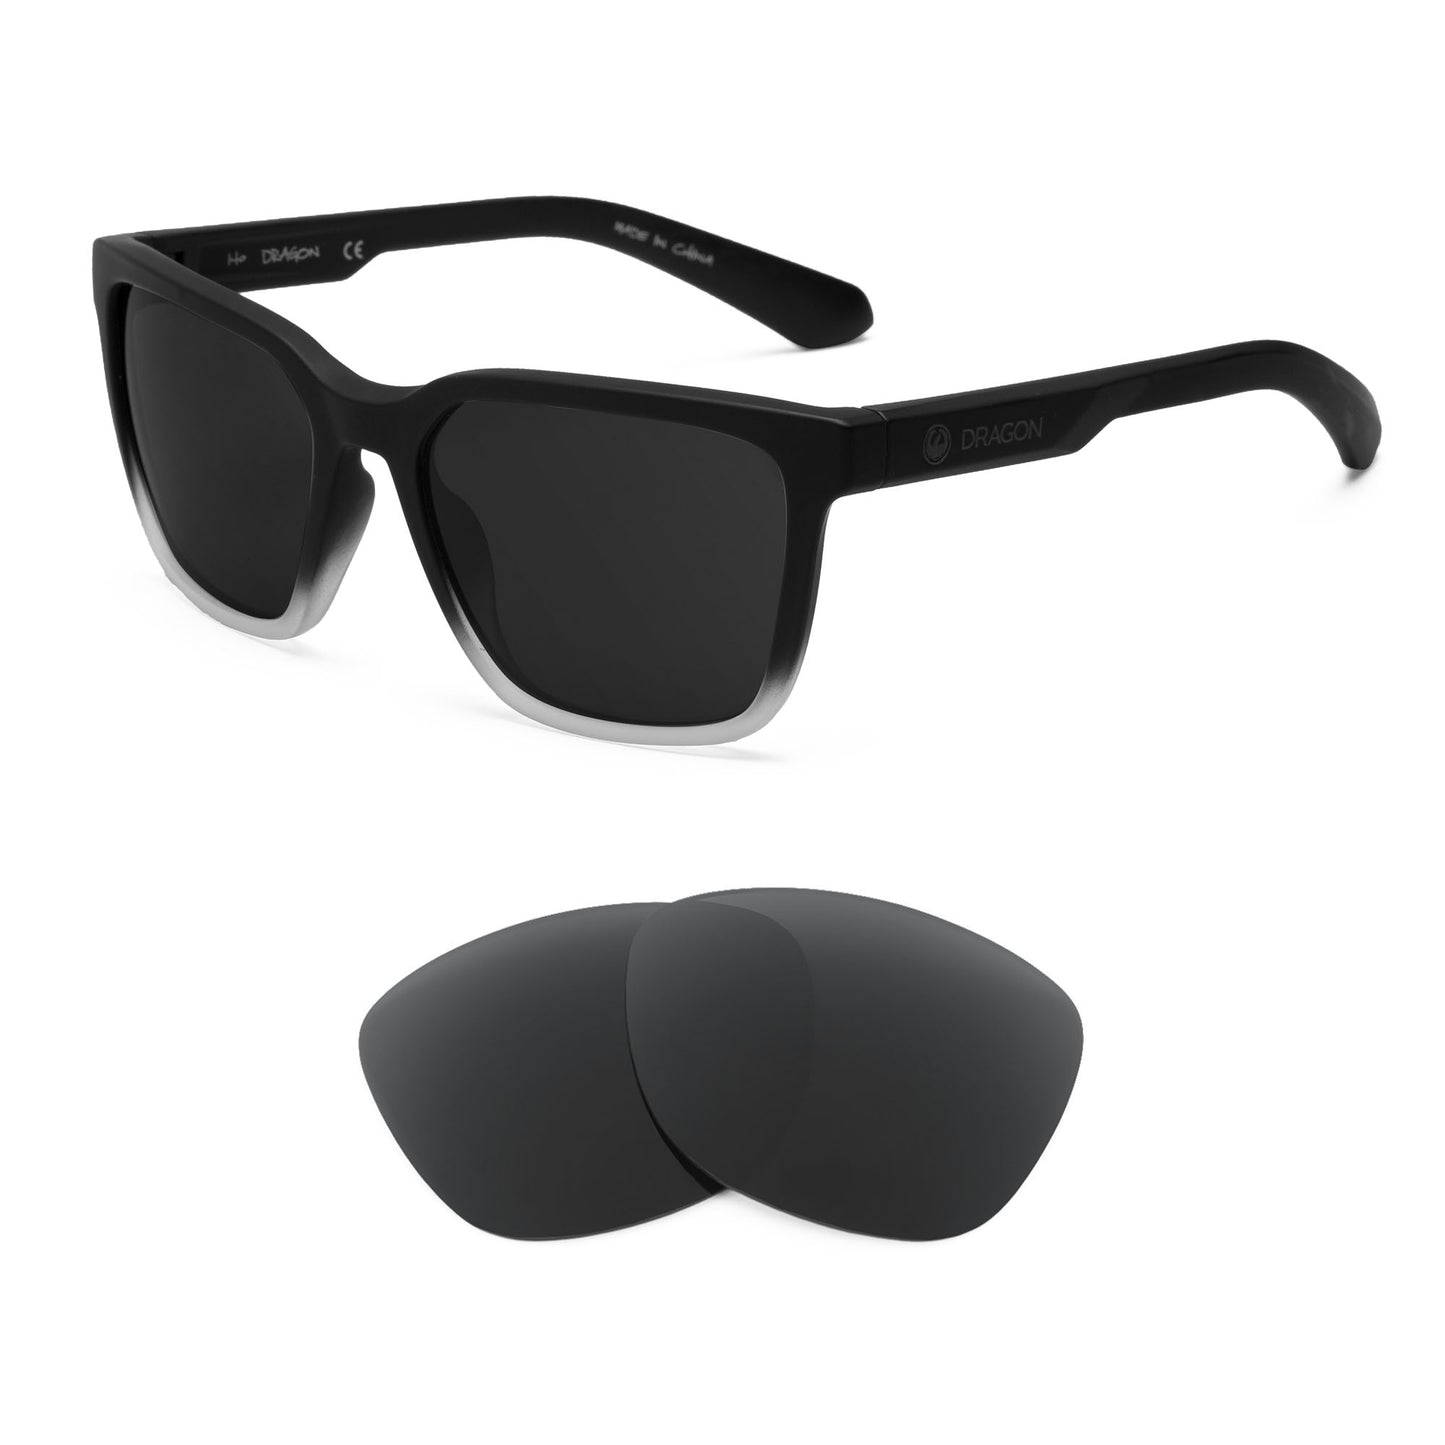 Dragon Burgee sunglasses with replacement lenses